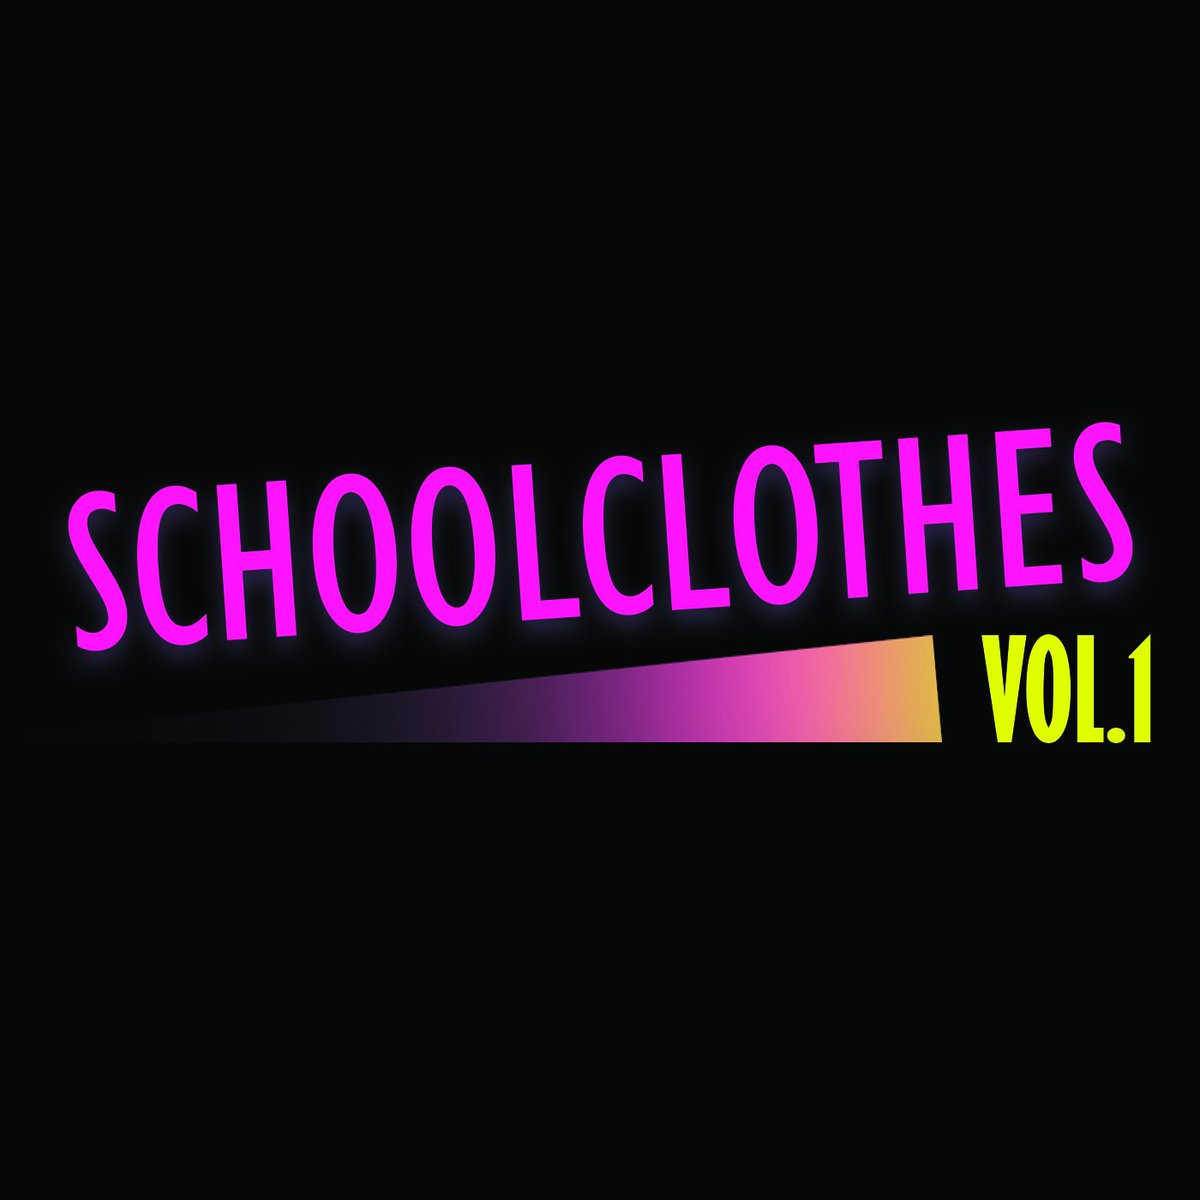 SchoolClothes Vol. 1 now available @iTunes @napster @eMusic @mndigital @GreatIndieMusic @amazonmp3 etc #OPS #HipHop